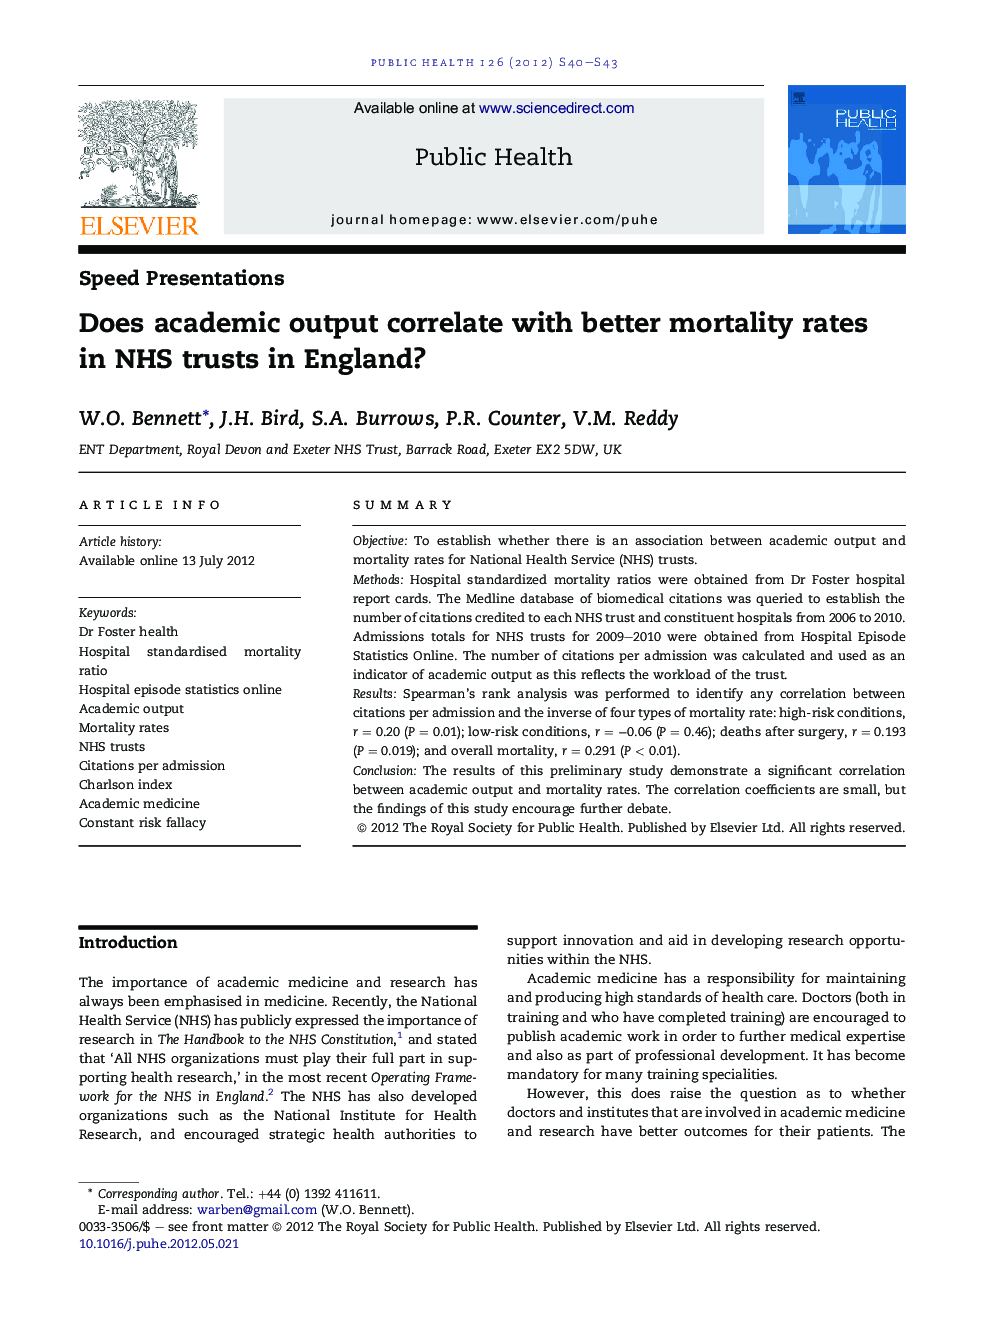 Does academic output correlate with better mortality rates in NHS trusts in England?